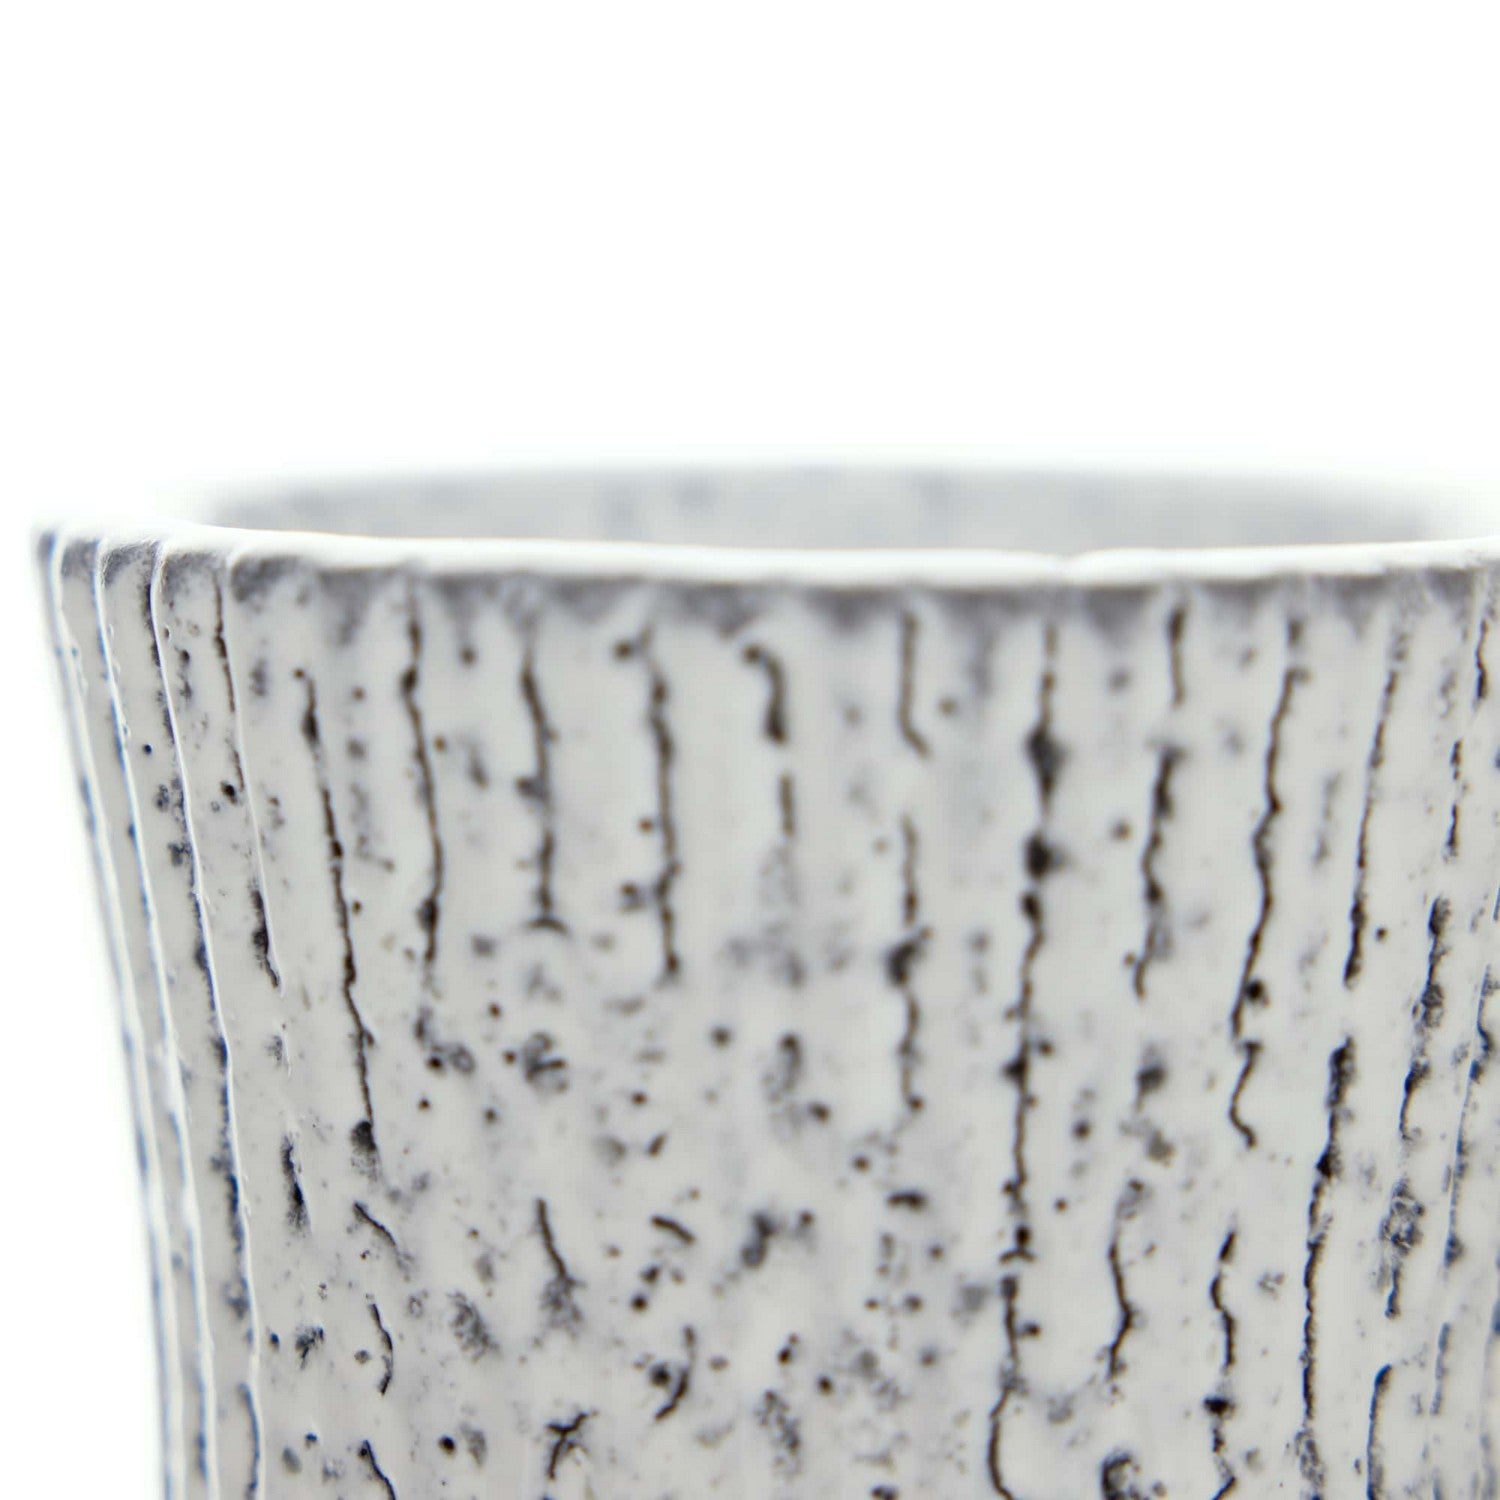 Vase from the Tilling collection in Ice Reactive finish